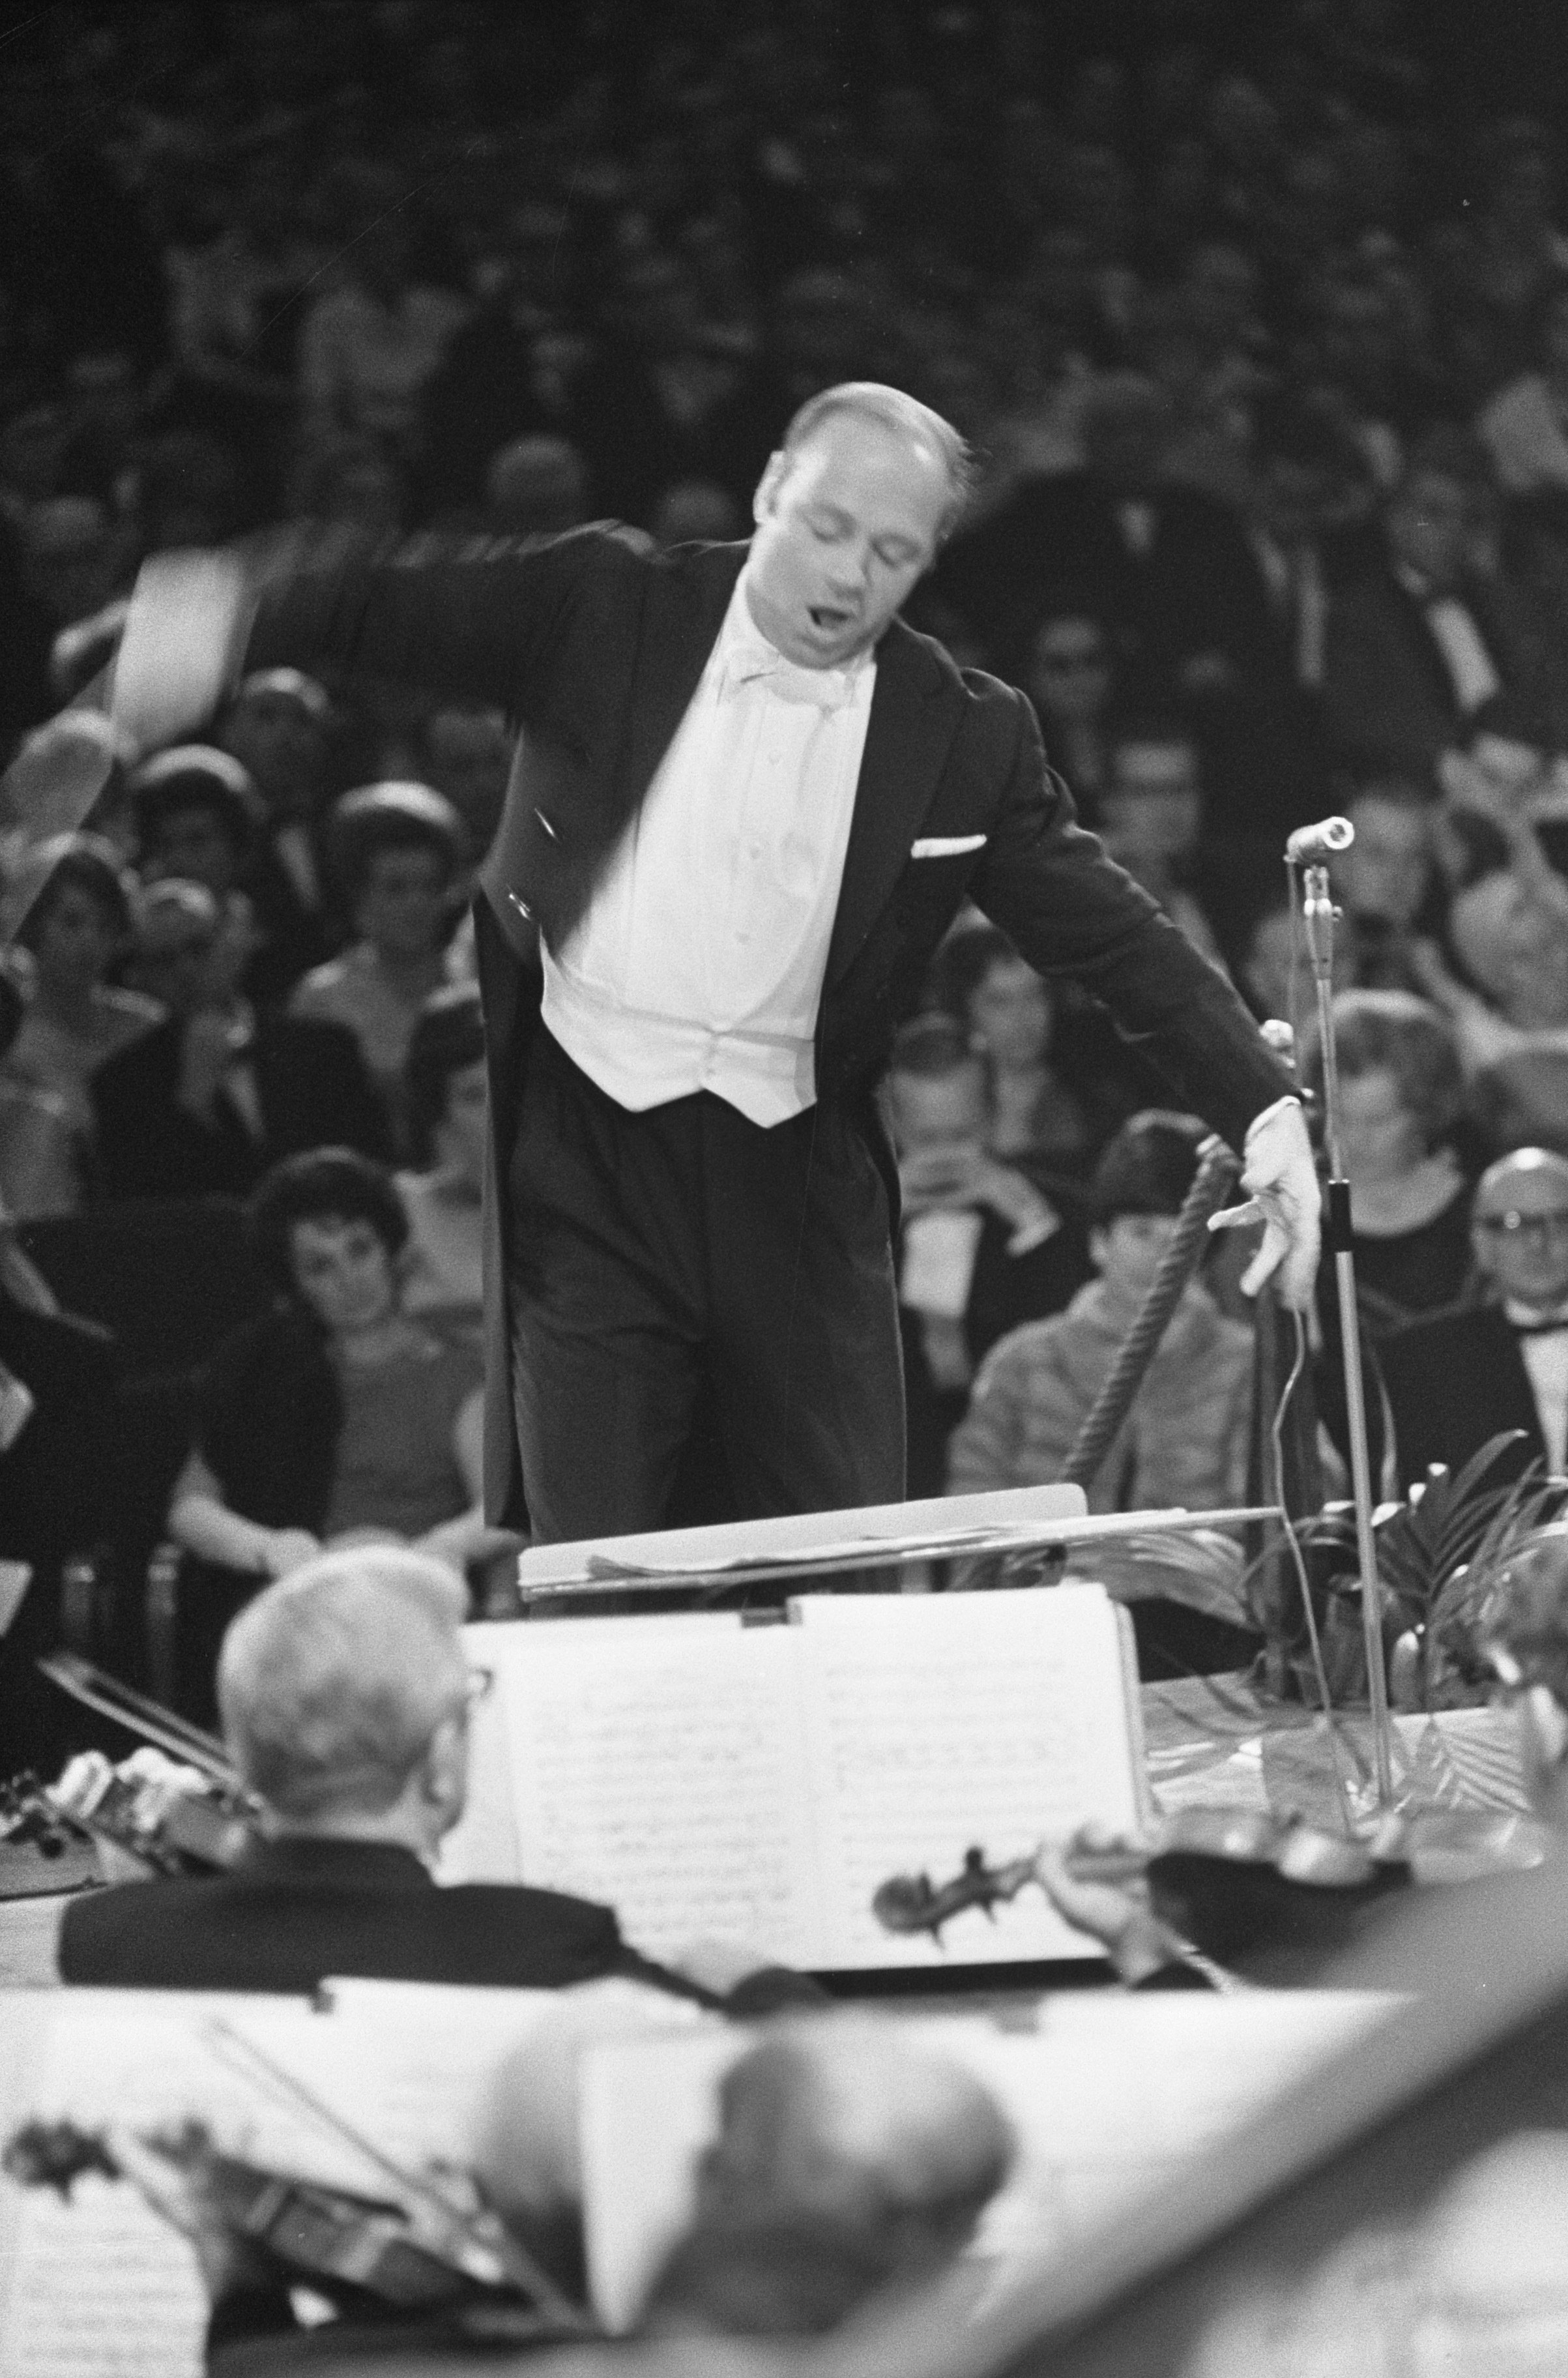 28 octobre 1966, Bernard HAITINK dirige le Amsterdamse Concertgebouw, Grand Gala du Disque 1966, Amsterdamse Concertgebouw, Collection / Archive Fotocollectie Anefo, Photographer Fotograaf Onbekend / Anefo, Copyright Holder Nationaal Archief, CC0, Catalog reference number 2.24.01.05, Inventory File Number 919-7330